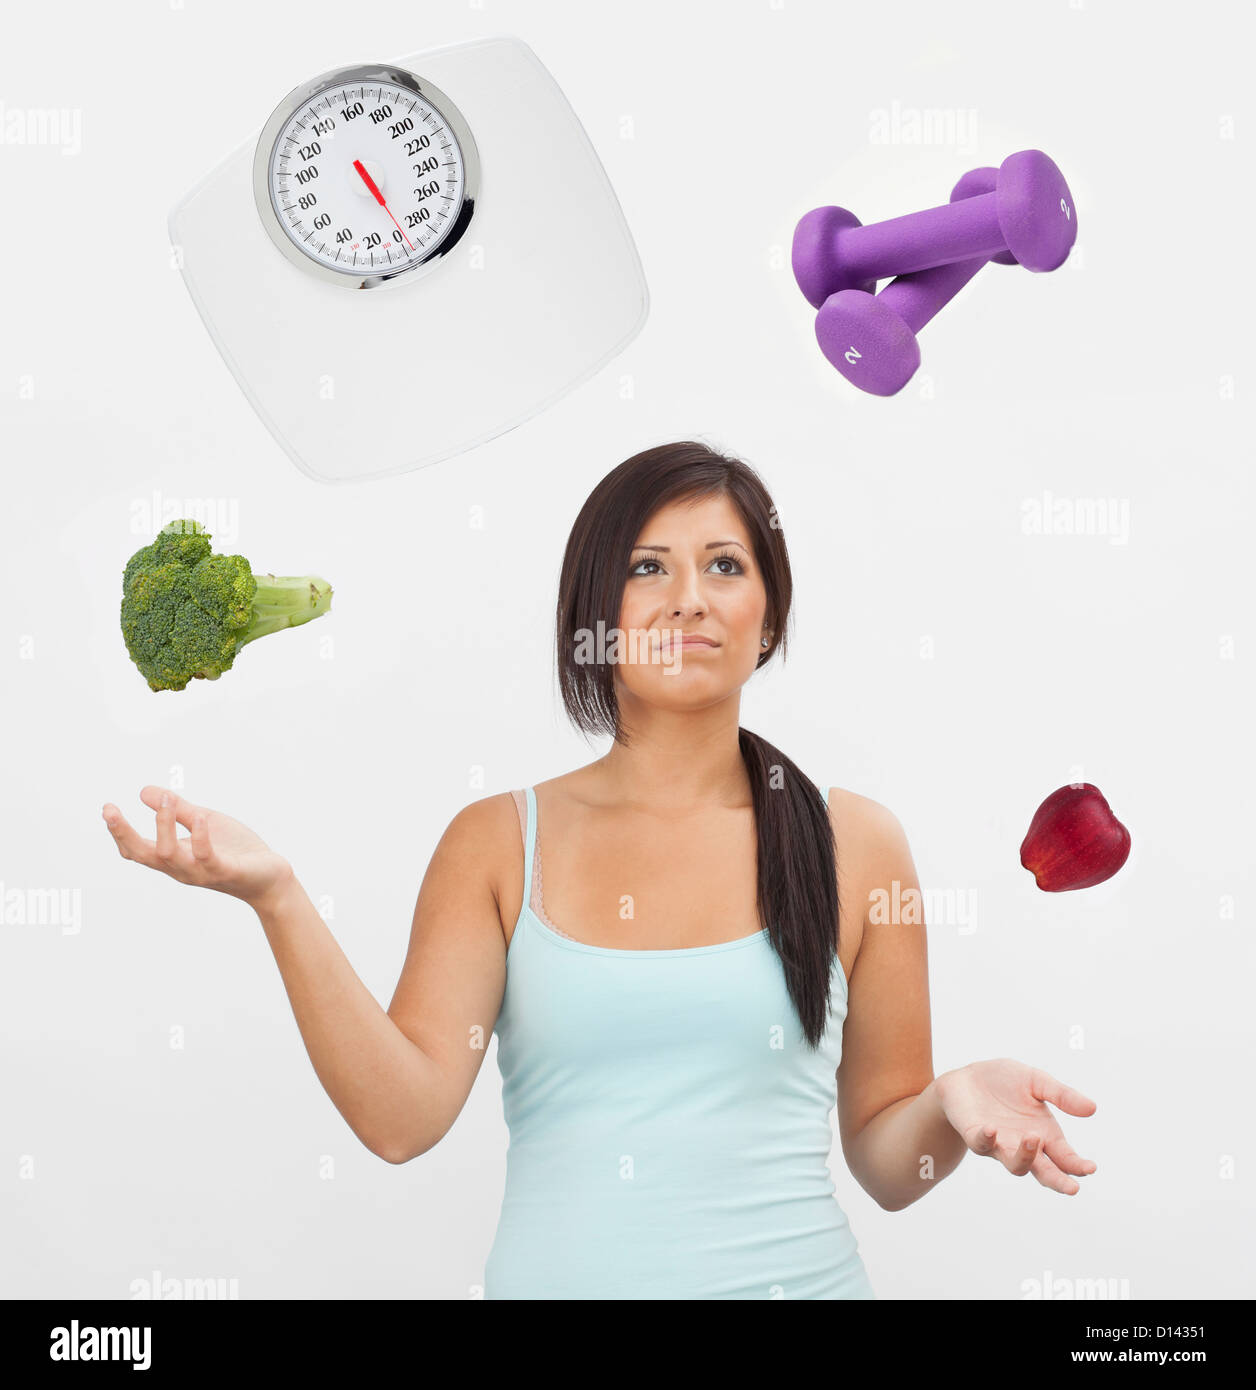 Studio shot of young woman juggling with weight scale, weights, fruit and vegetable Stock Photo